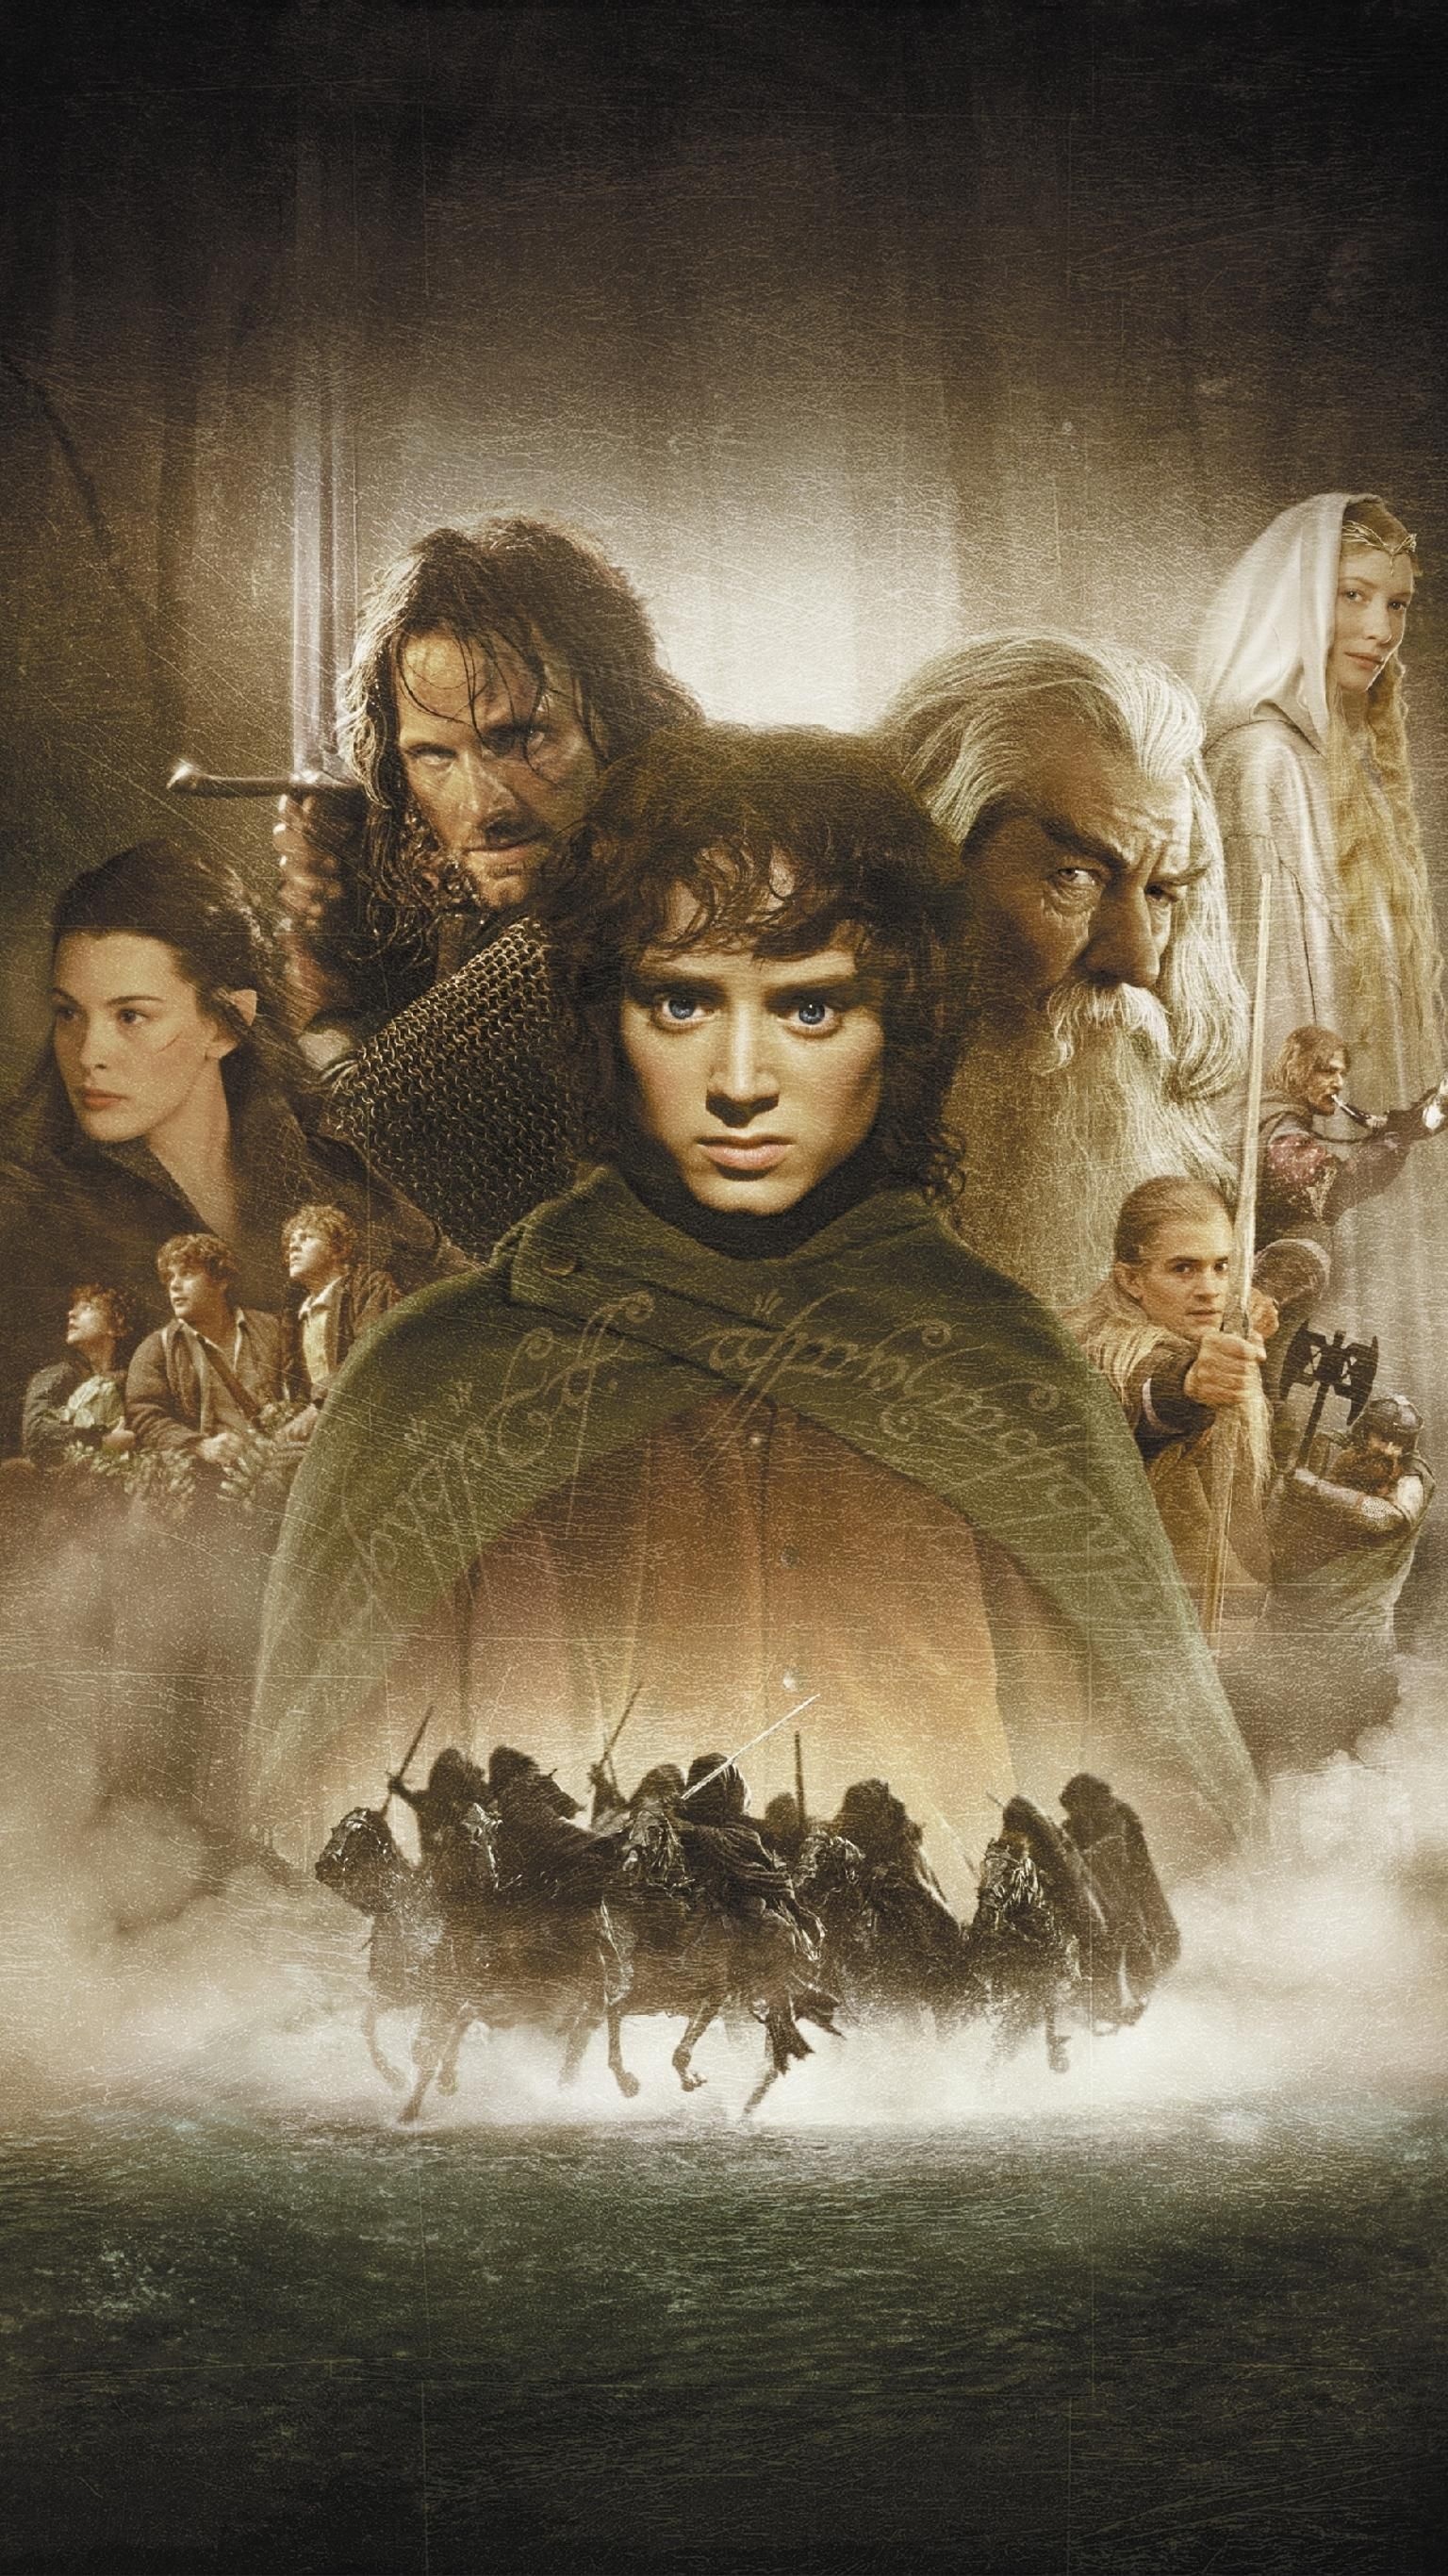 The Lord of the Rings, The Hobbit, Phone wallpapers, Cinematic wonders, 1540x2740 HD Handy